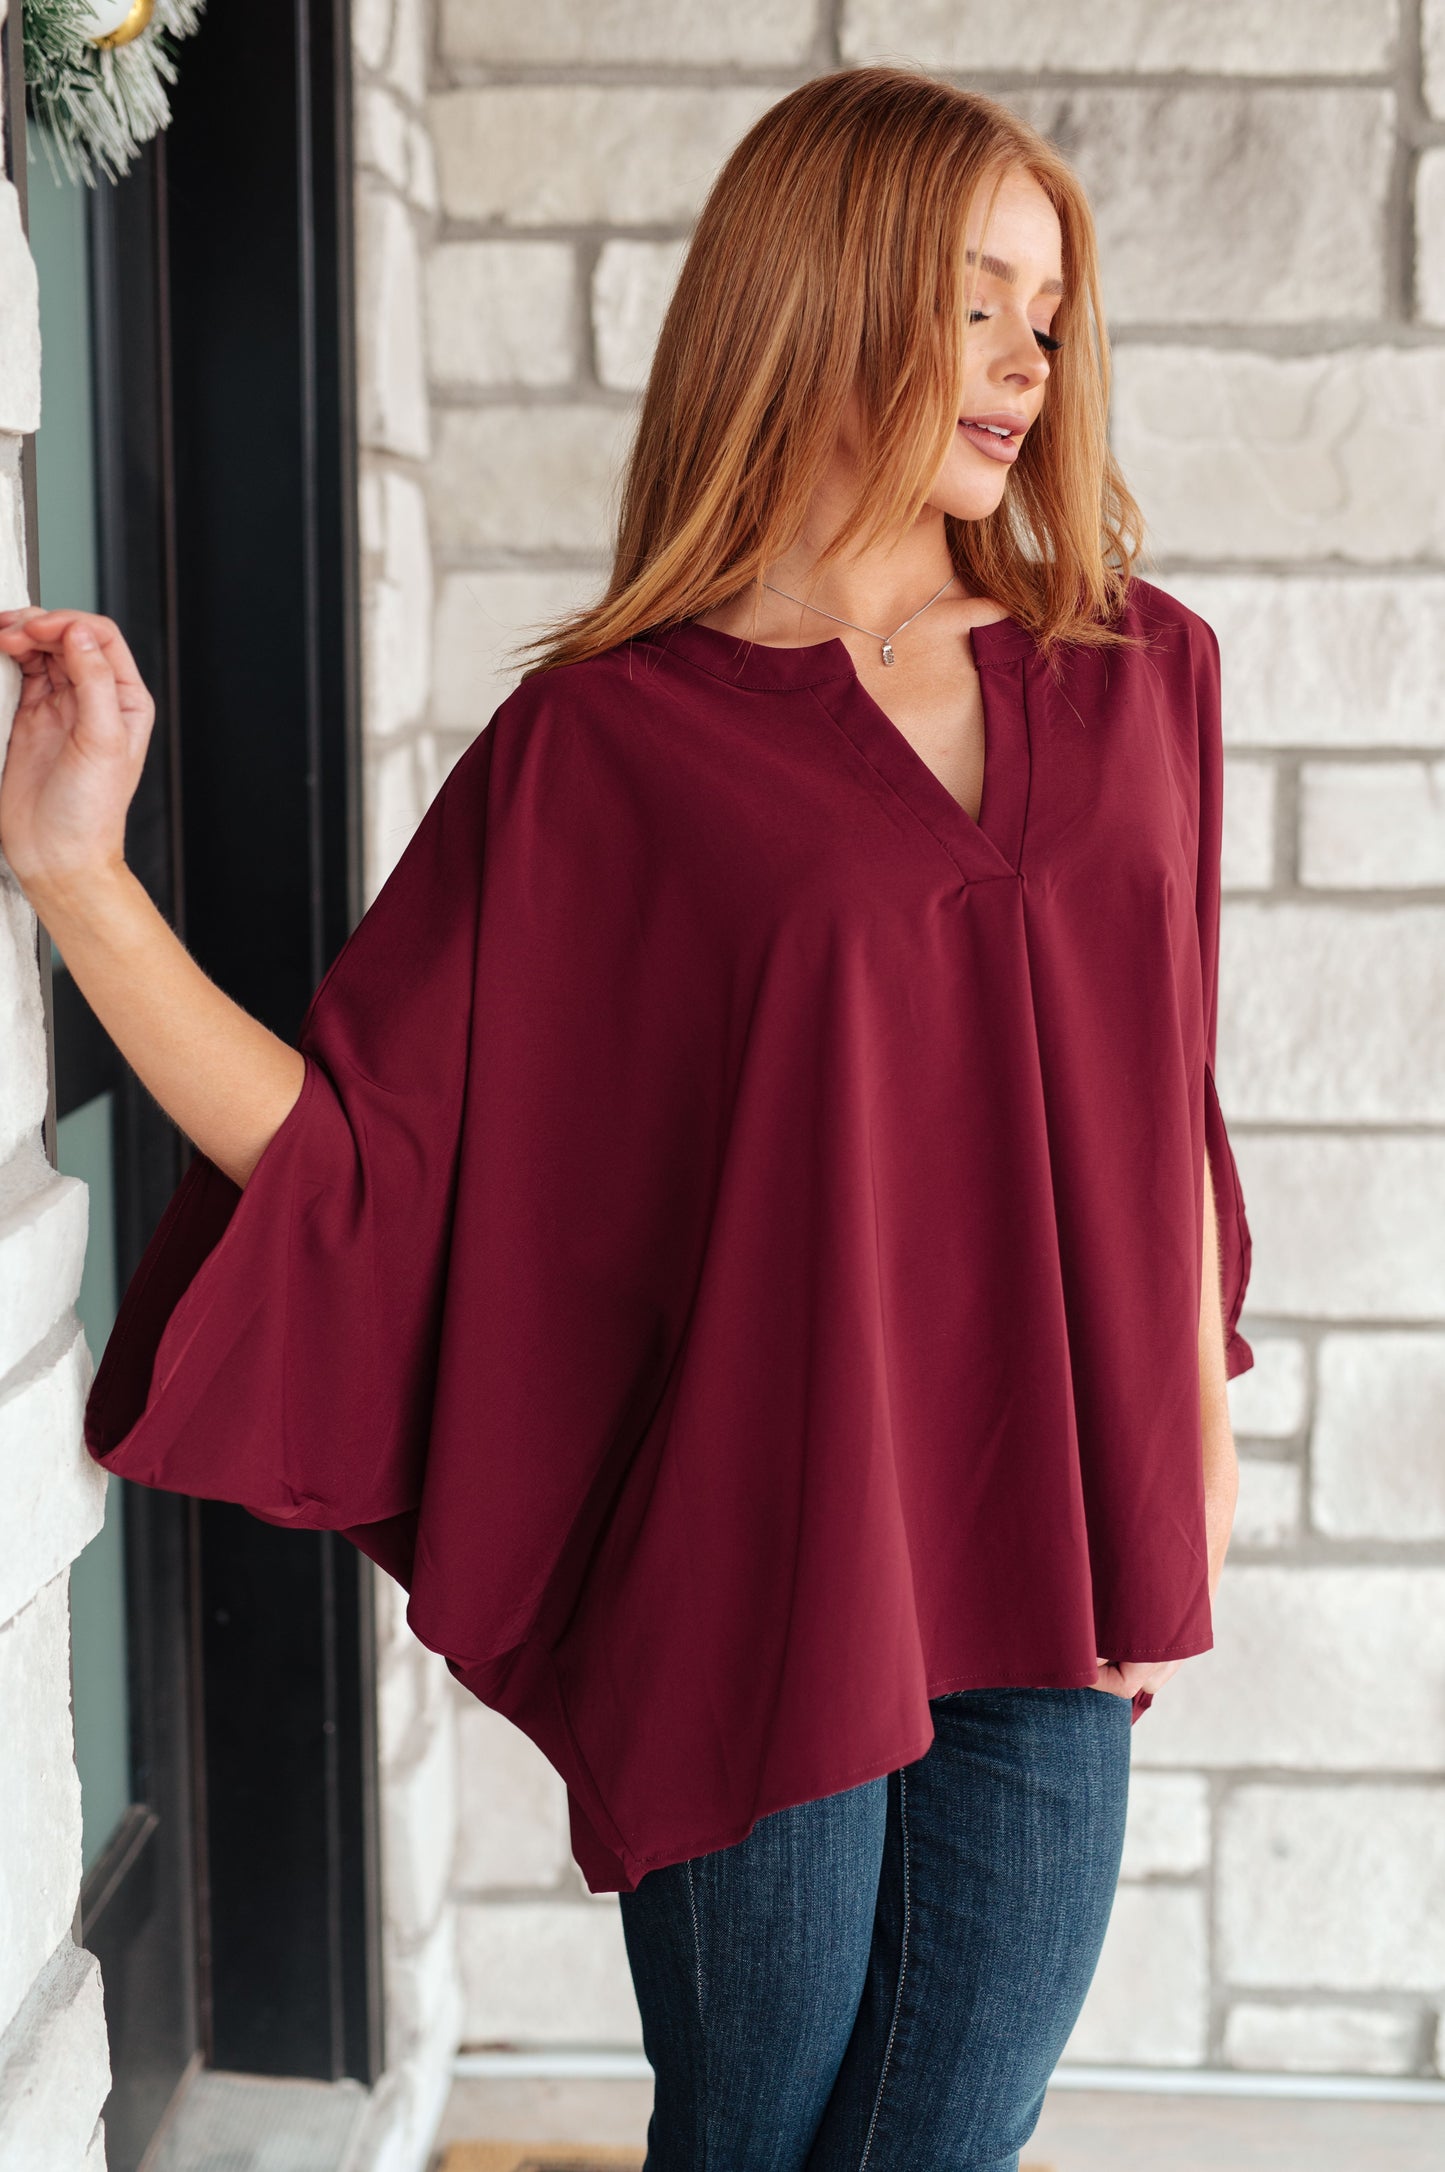 Universal Philosophy Blouse in Dry Rose